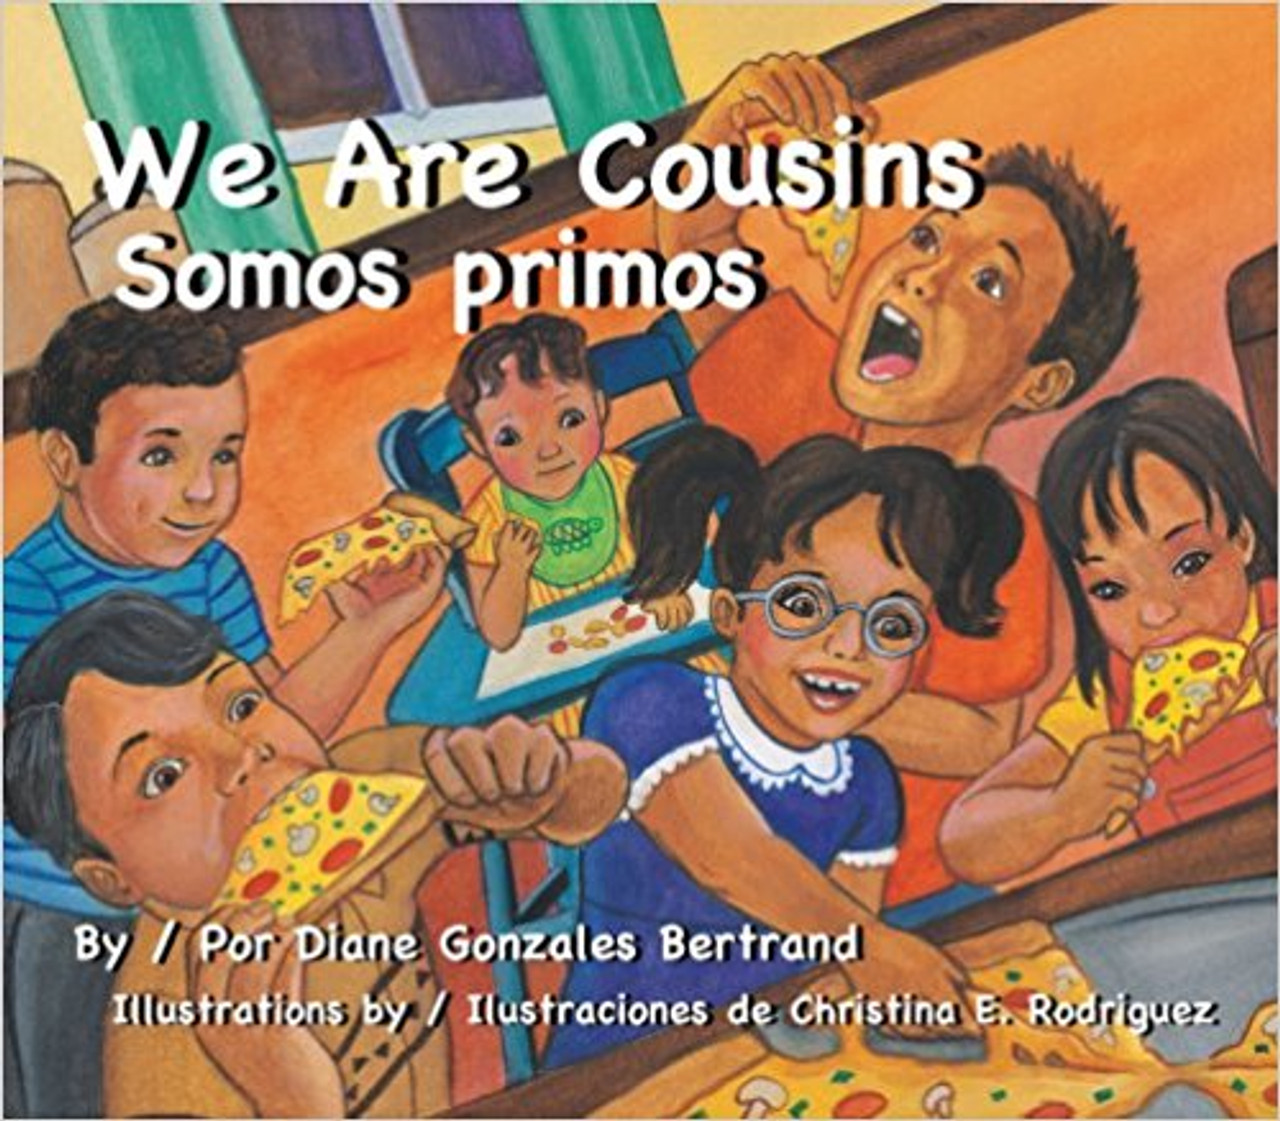 We are Cousins / Somos Primos by Diane Gonzales Bertrand by Diane Gonzales Bertrand